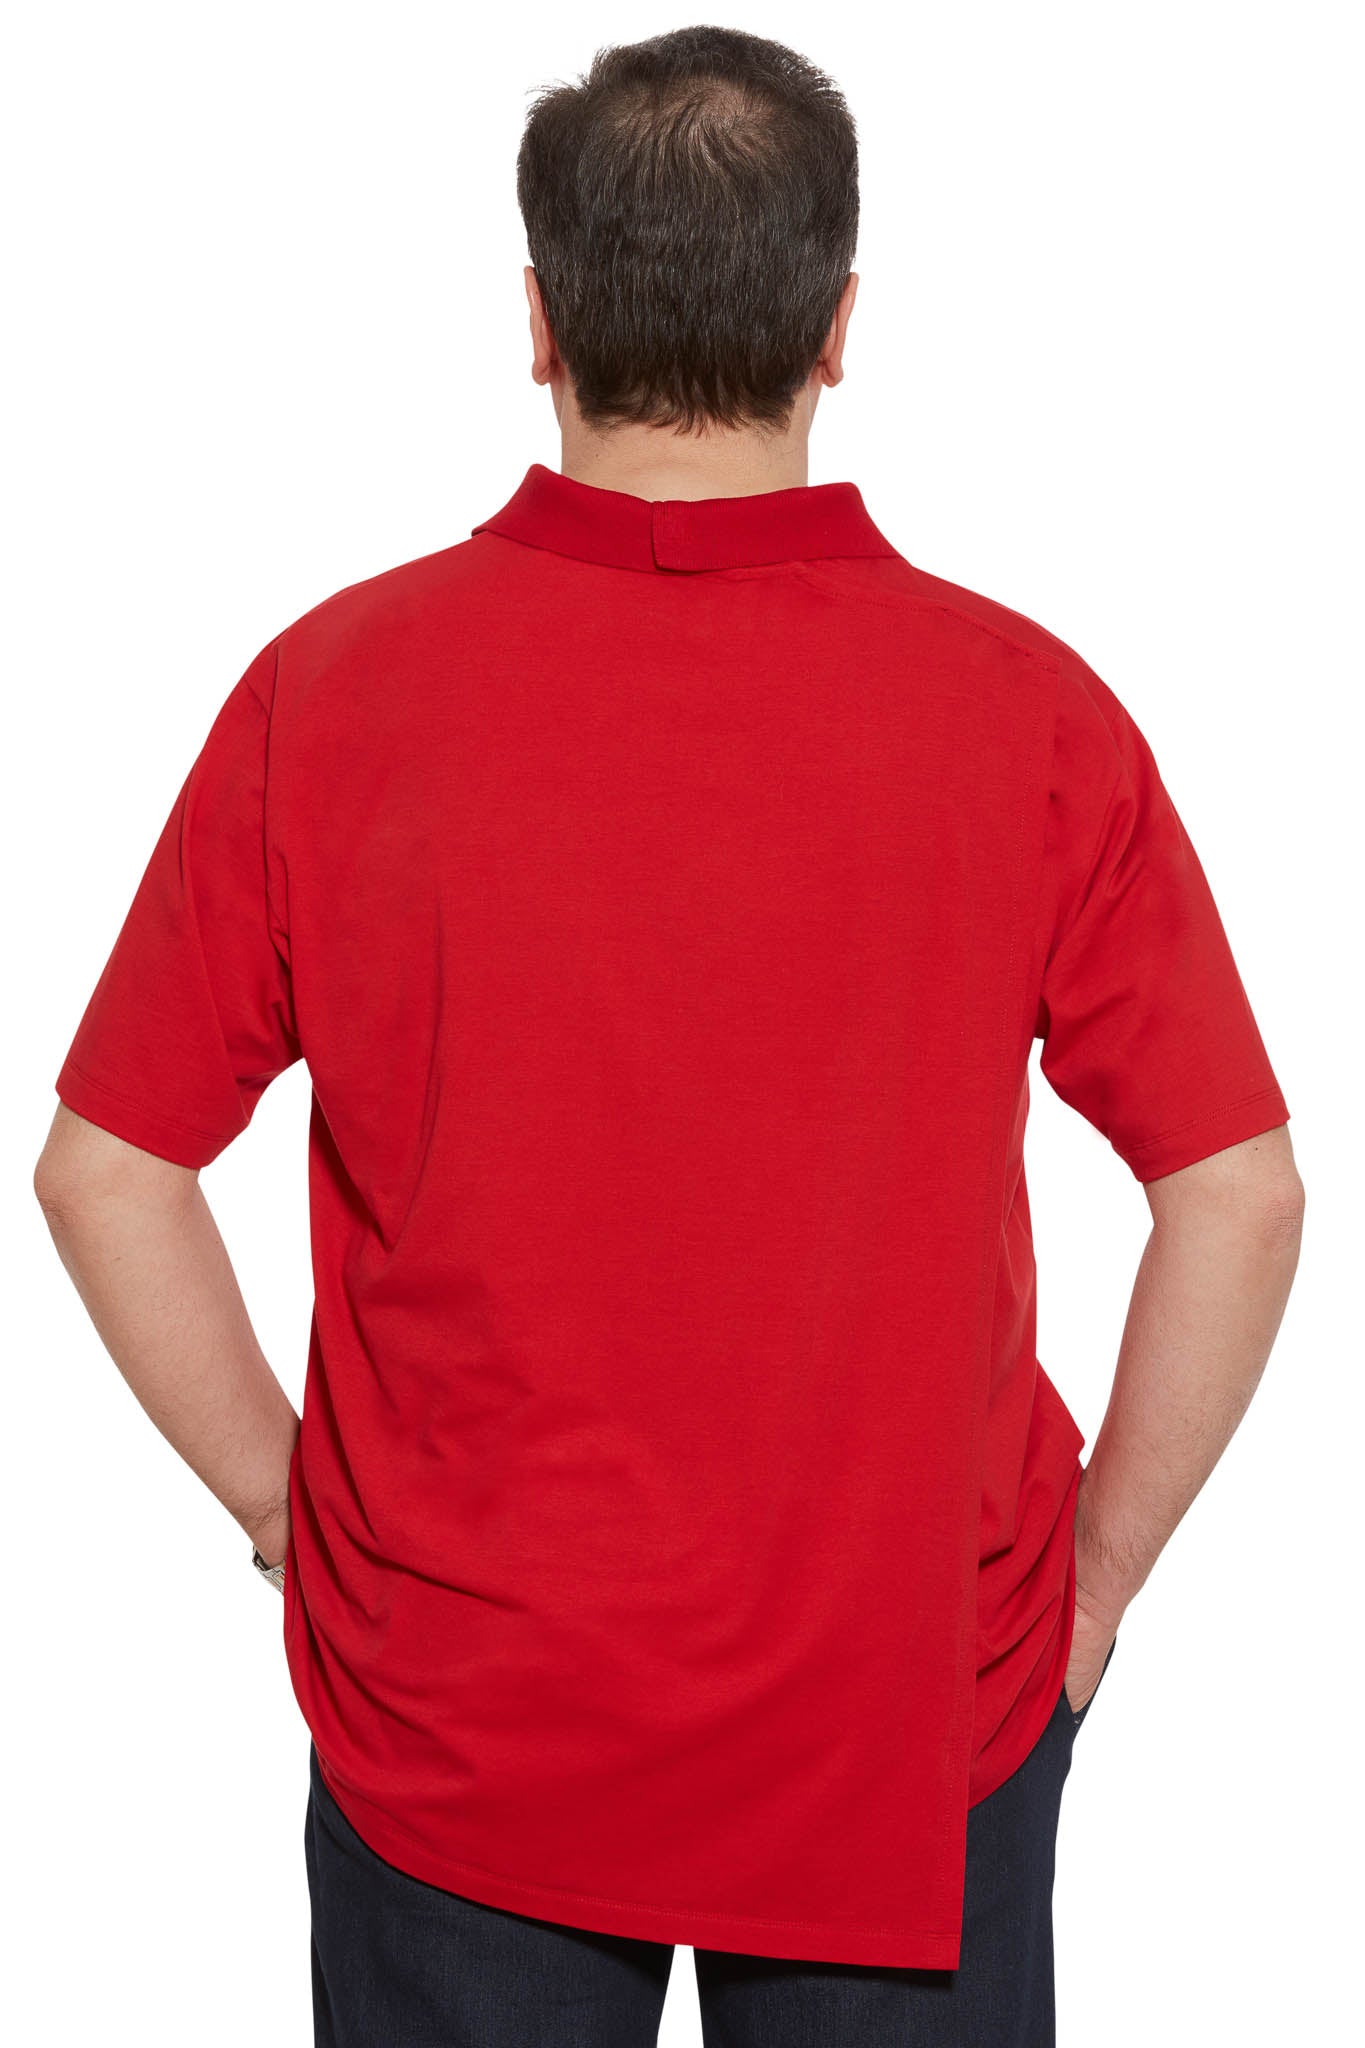 Polo Shirt for Men - Red | Ralfie | Adaptive Clothing by Ovidis